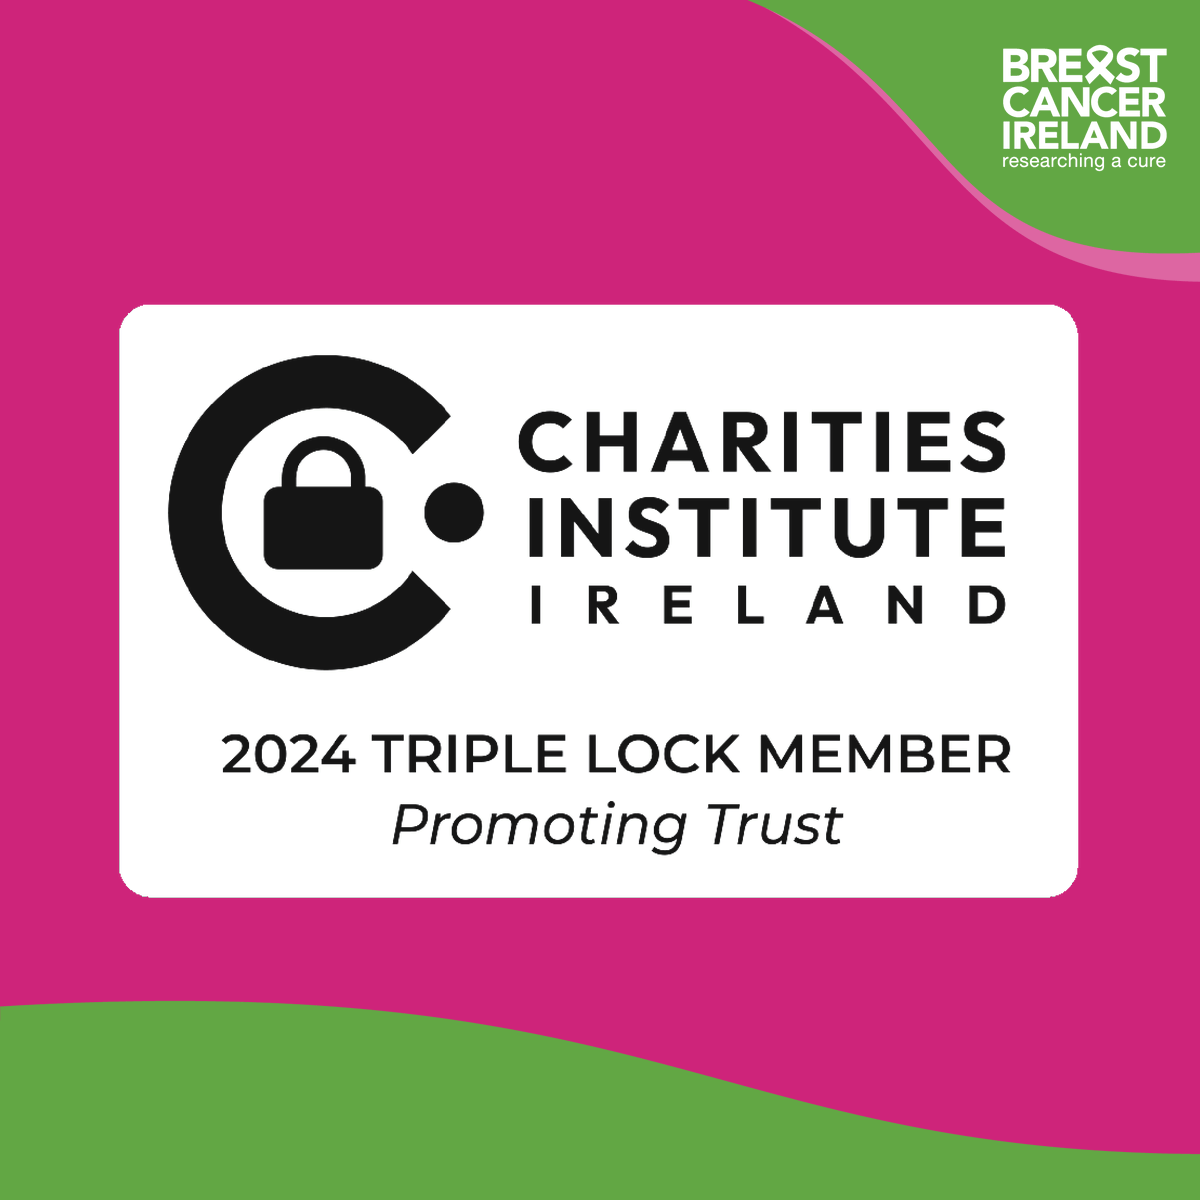 Breast Cancer Ireland is delighted to retain its annual Triple lock status, acknowledging good governance and ensuring our work is conducted within the proper guidelines and codes of best charitable practice. @CiiTweets